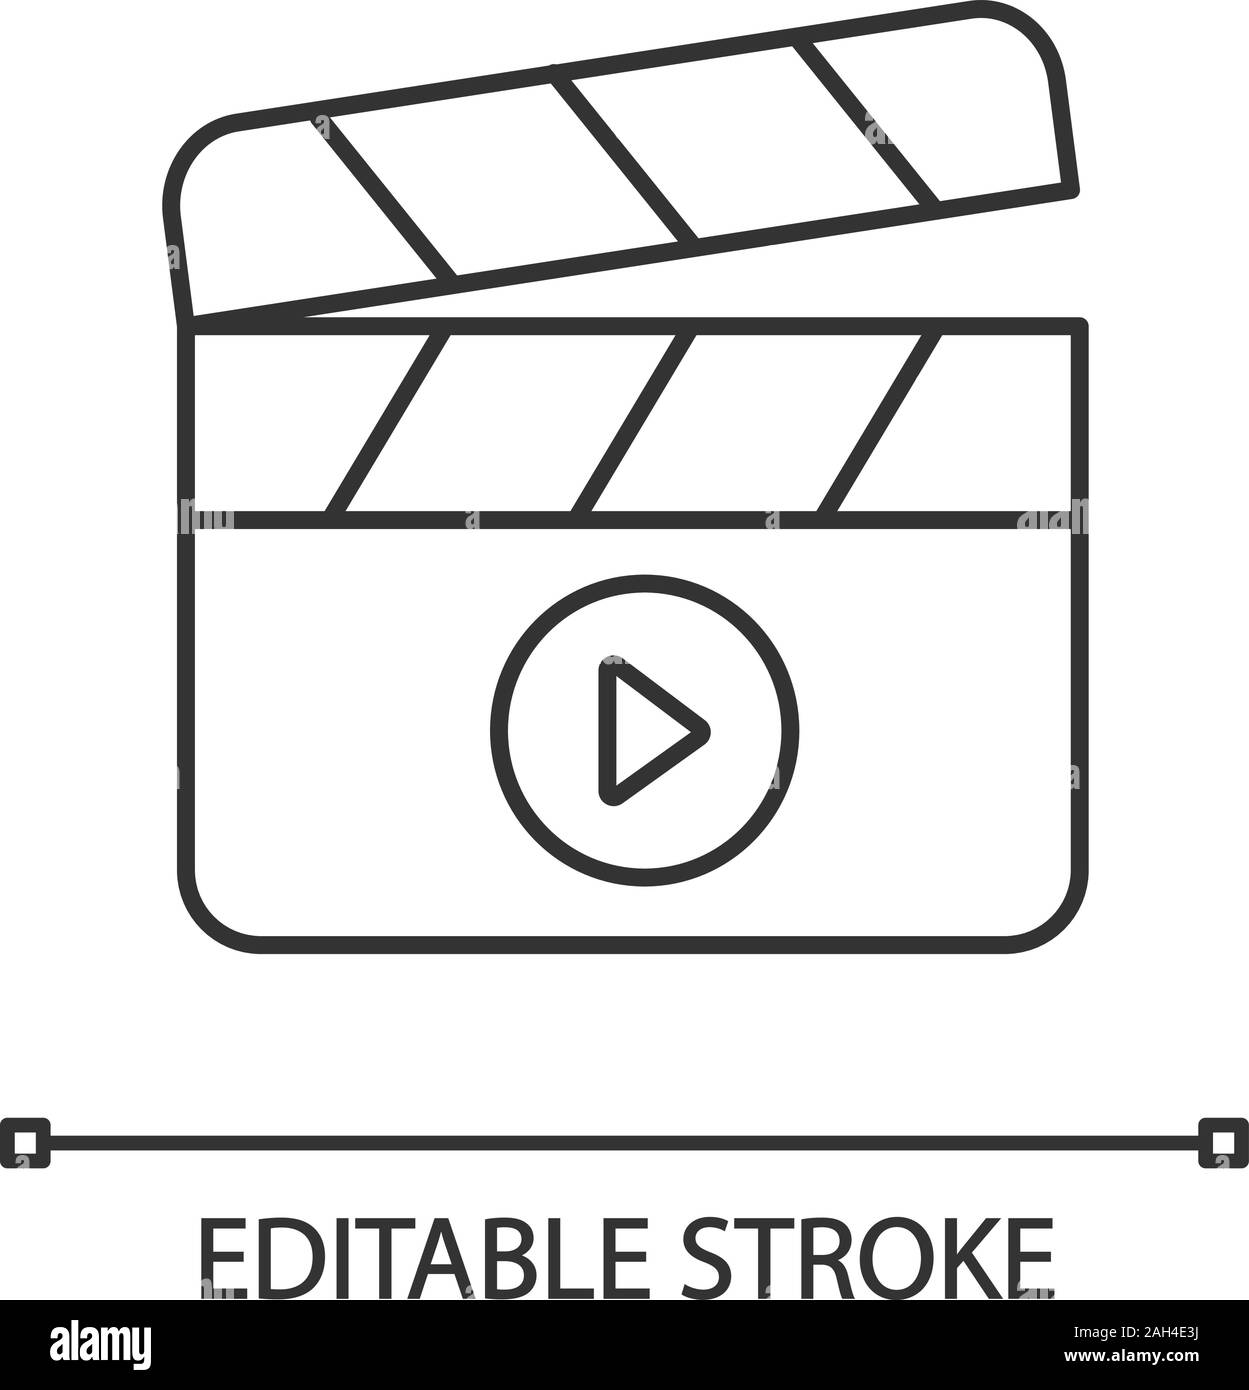 Filming linear icon. Film industry. Thin line illustration. Clapperboard. Time code slate. Video production. Cinematography. Contour symbol. Vector is Stock Vector